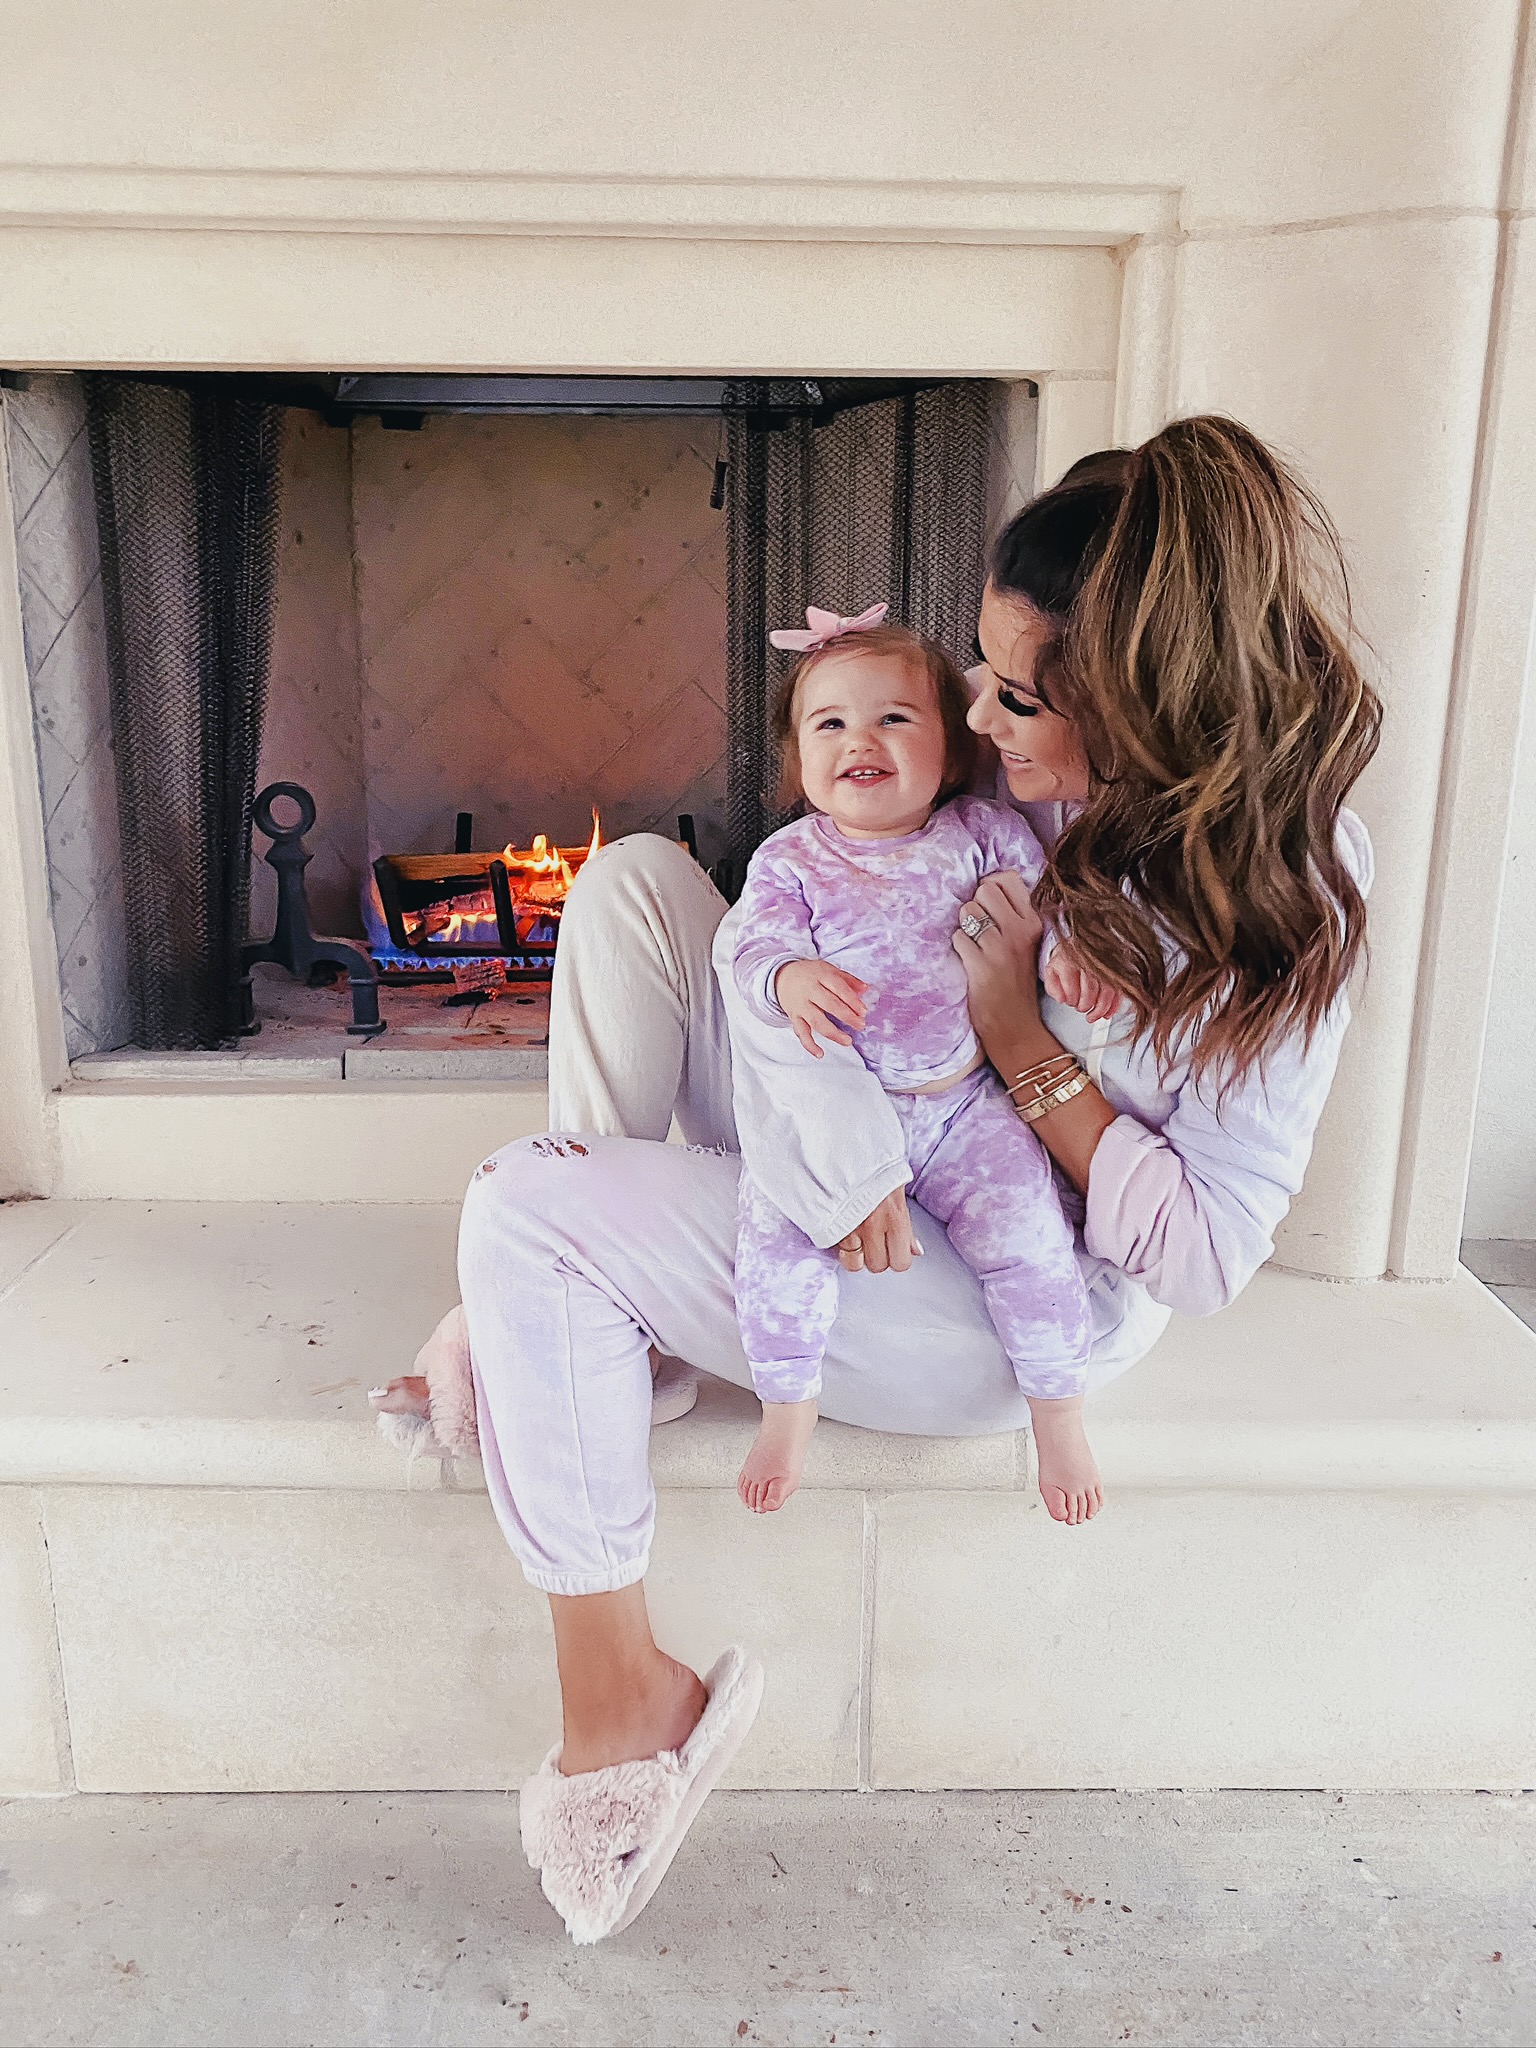 Instagram Recap by popular US lifestyle blog, The Sweetest Thing: image of Emily Gemma wearing a n:philanthropy sweatshirt, n:philanthropy sweat pants, and Amazon HALLUCI Women's Cross Band Soft Plush Fleece House Indoor or Outdoor Slippers while holding her daughter who is wearing Amazon VAENAIT BABY 12M-12 Toddler Kids Boys Girls 100% Cotton Marbling Sung Fit Sleepwear Pajamas set and a Amazon CEELGON Big Hair Bow.